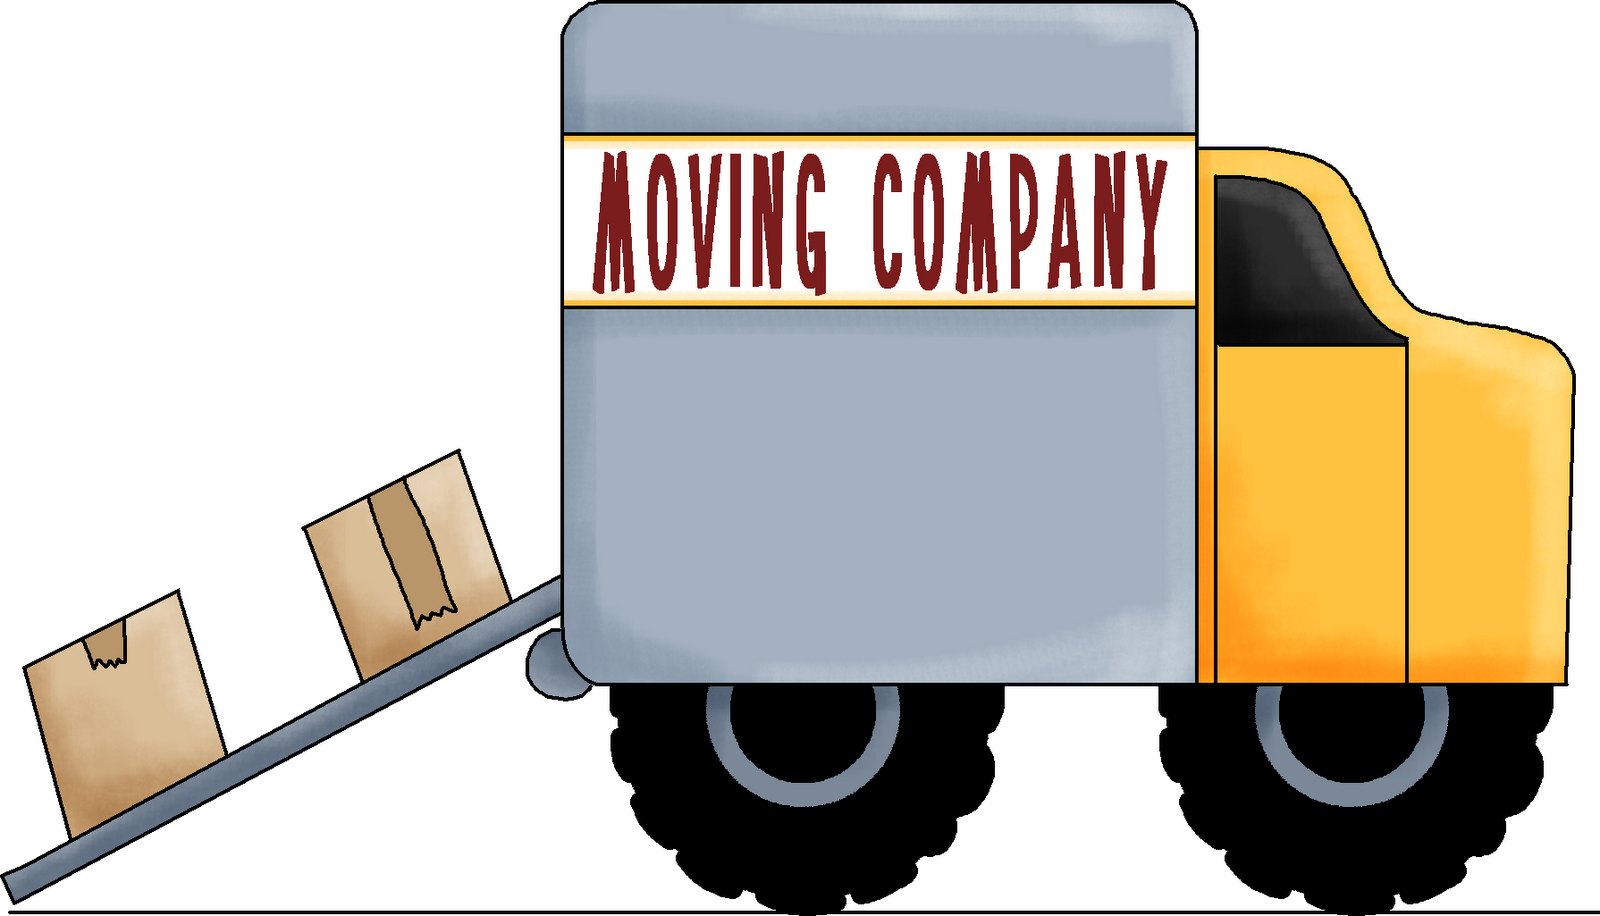 Moving Van Clipart | Free Download Clip Art | Free Clip Art | on ...